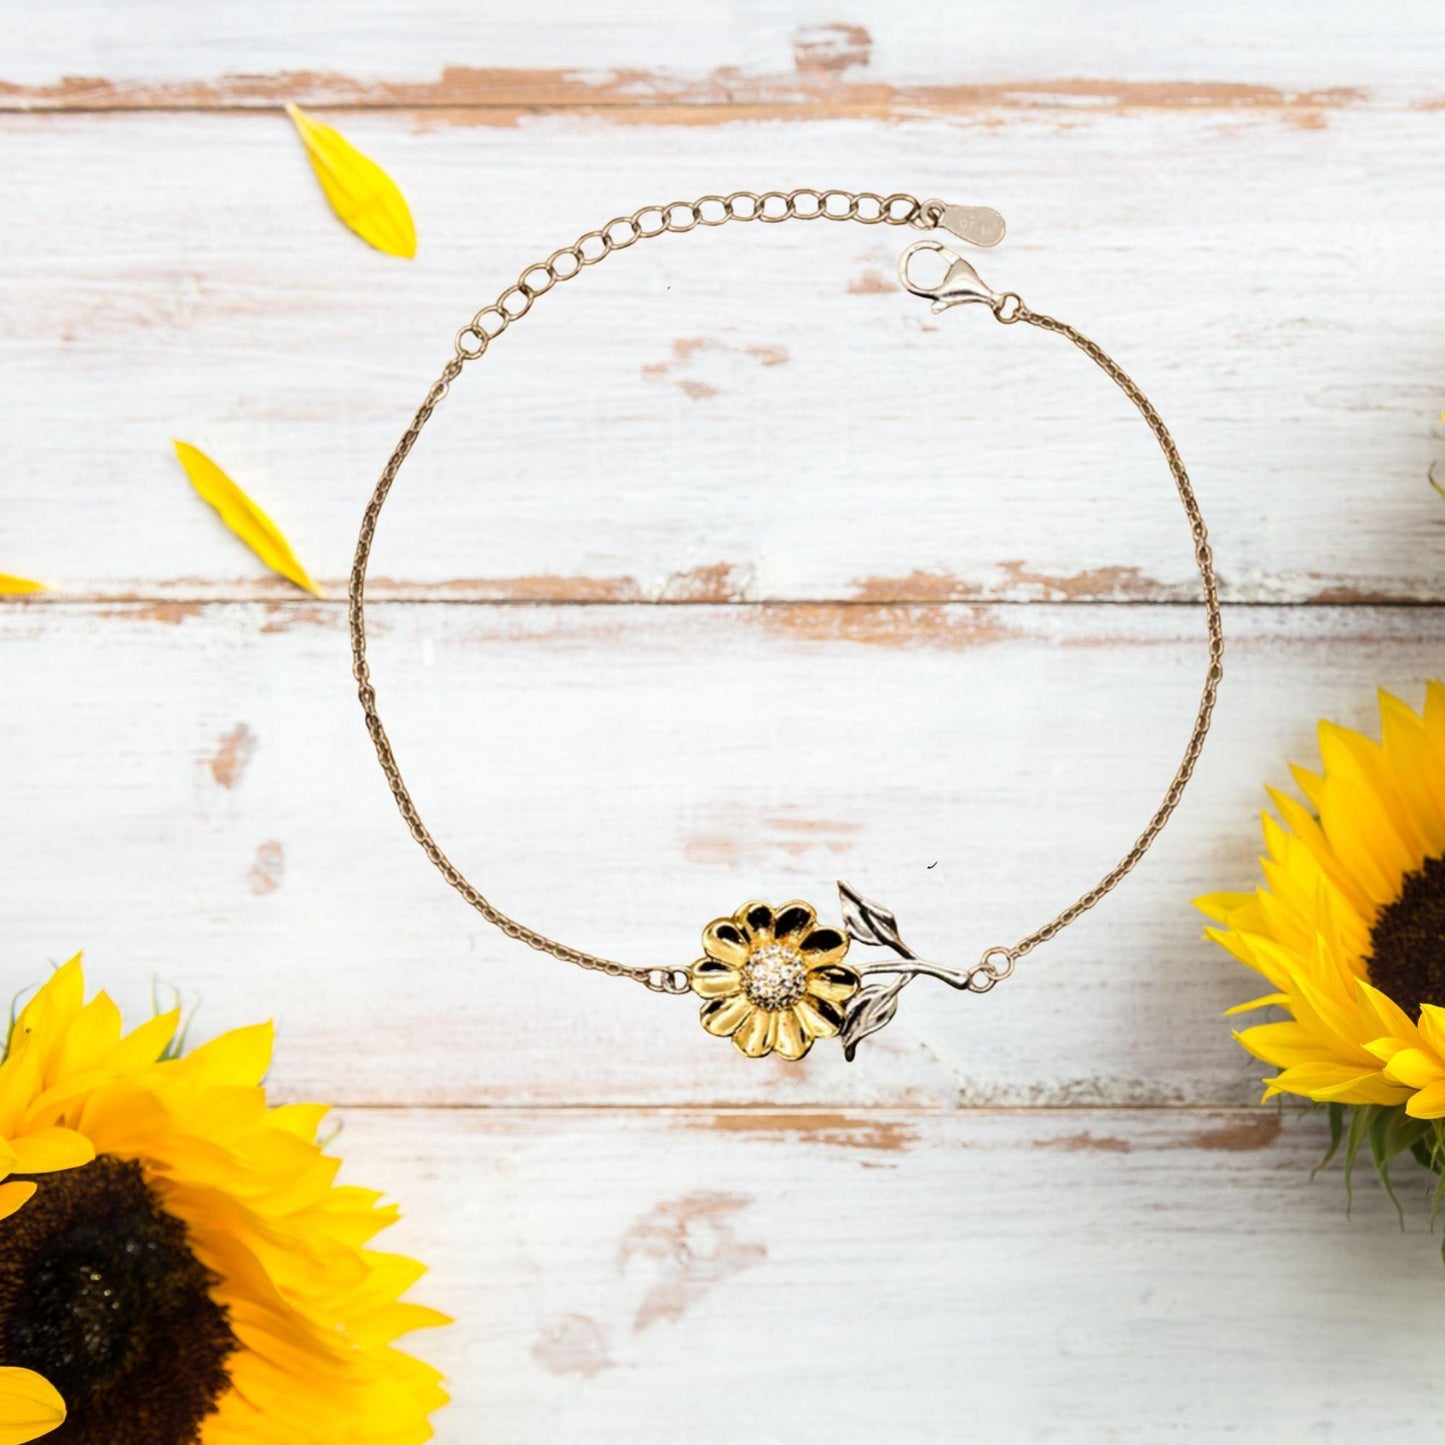 Motivational Cousin Sunflower Bracelet - I can promise to love you for the rest of my life, Birthday, Christmas Holiday Jewelry Gift - Mallard Moon Gift Shop